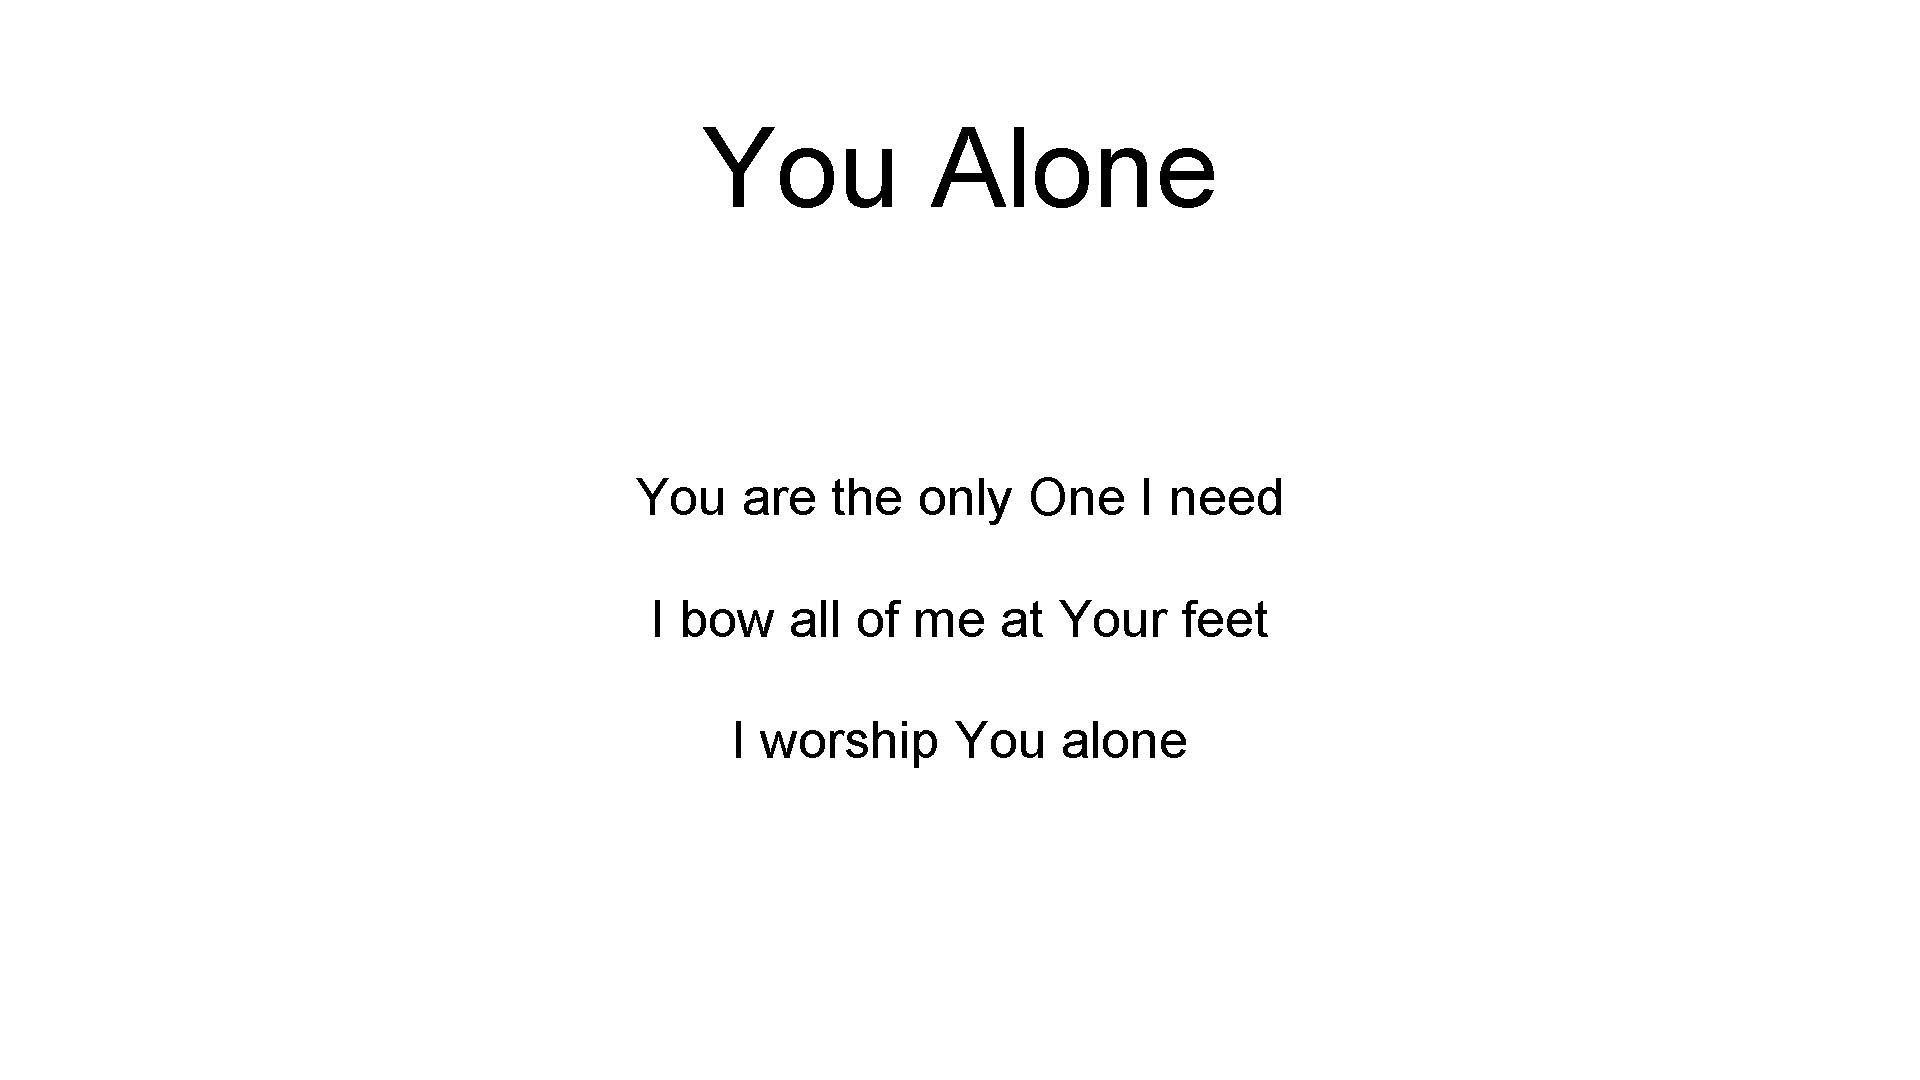 You Alone You are the only One I need I bow all of me